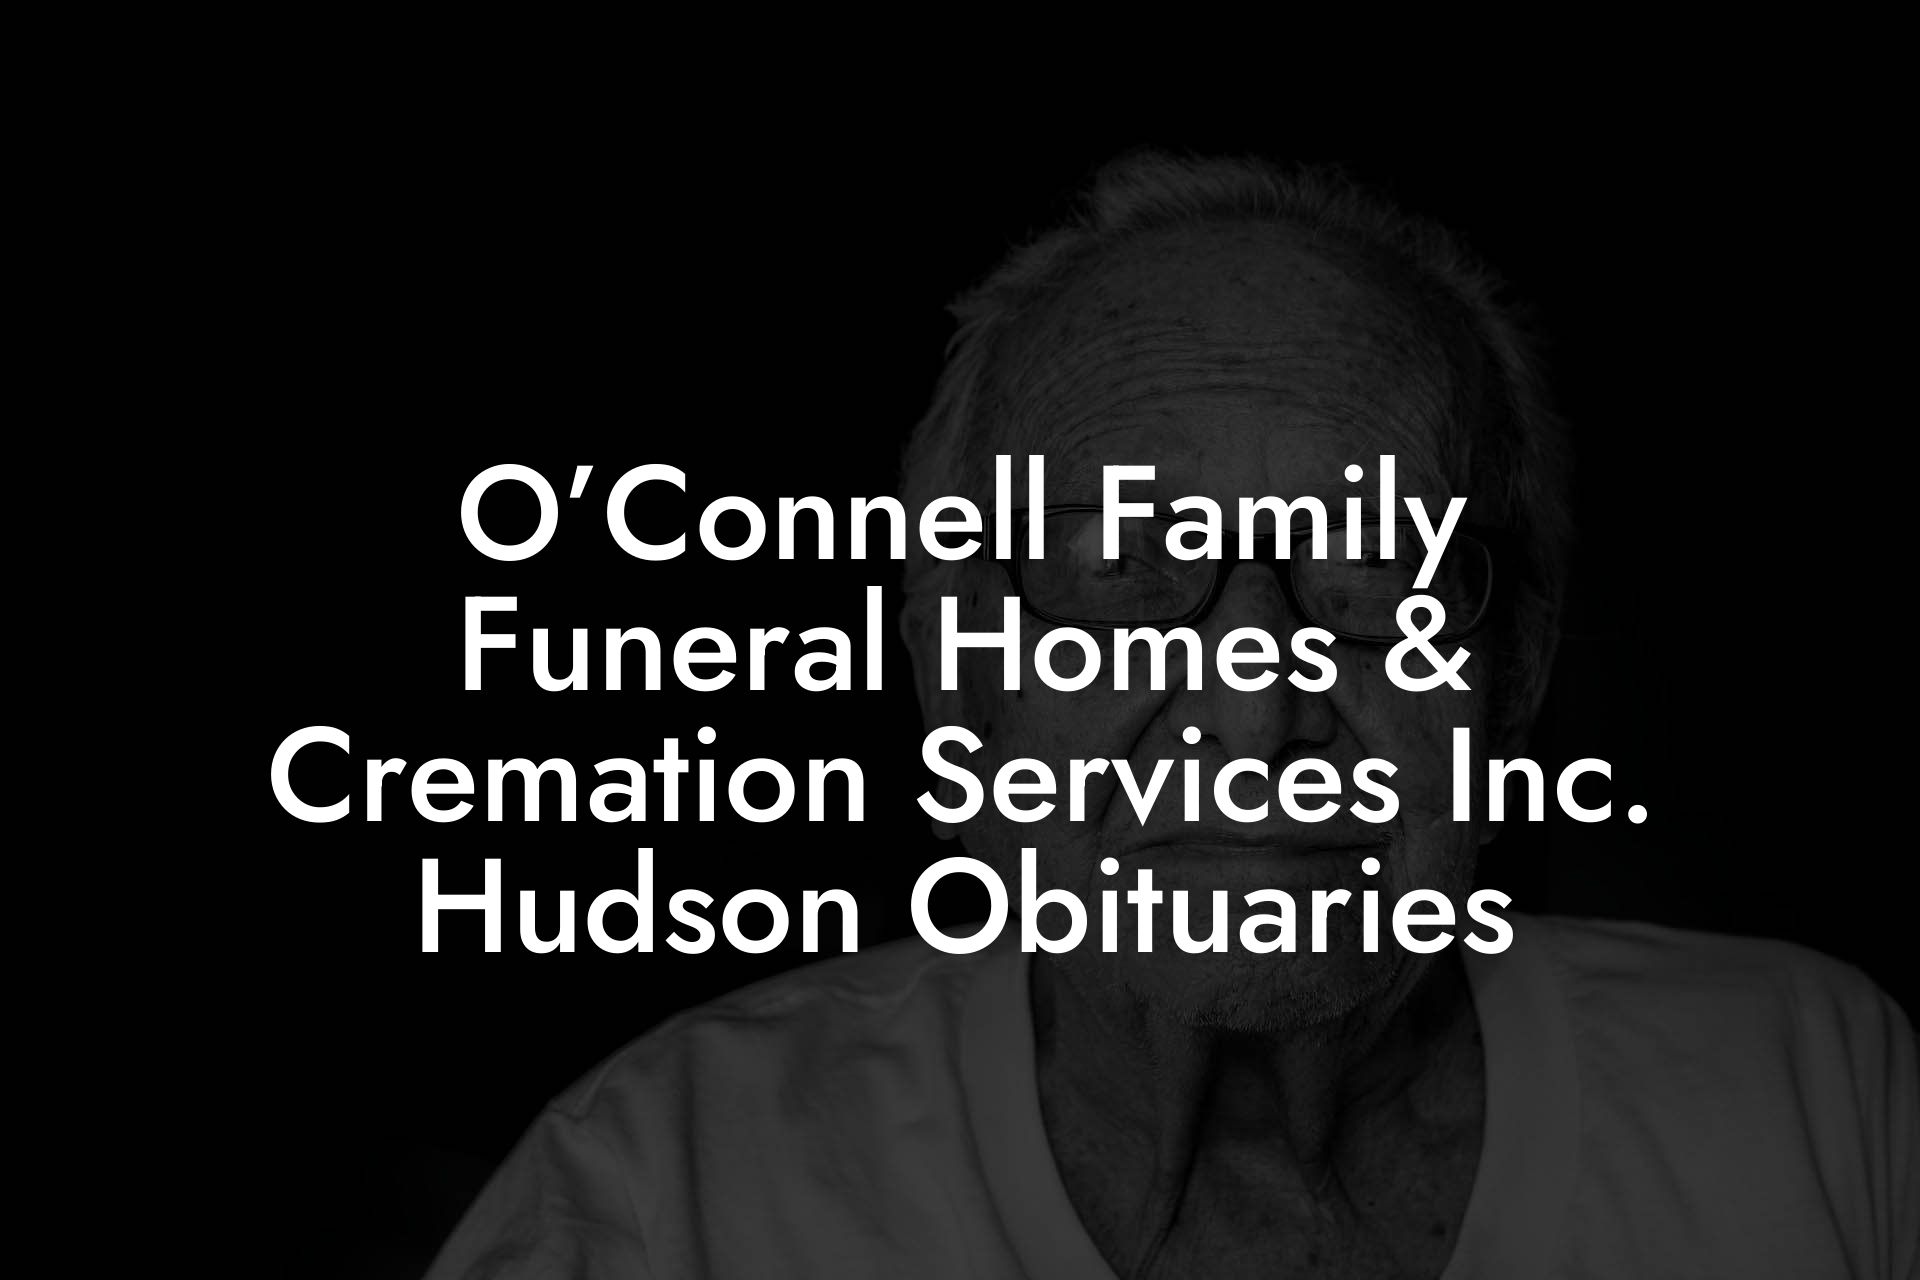 O’Connell Family Funeral Homes & Cremation Services Inc. Hudson Obituaries